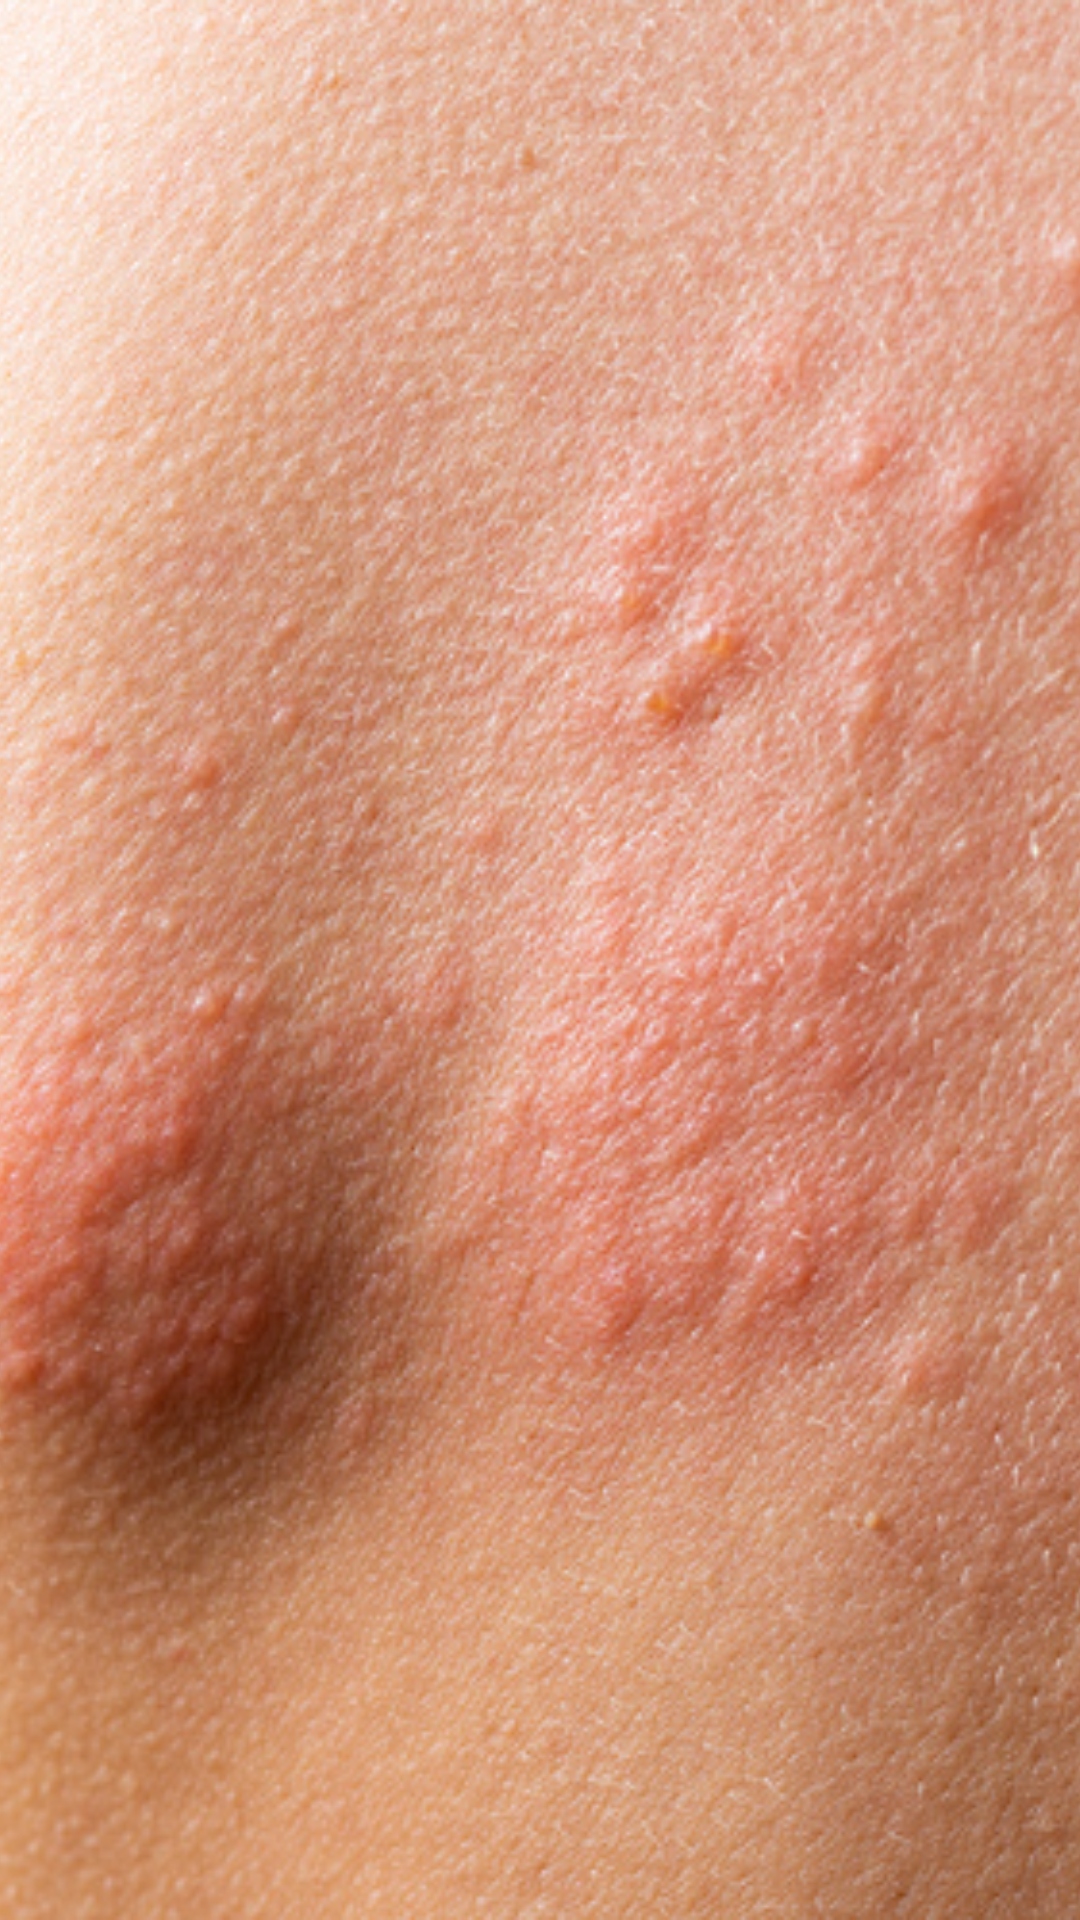 5 early signs of Shingles you should not ignore